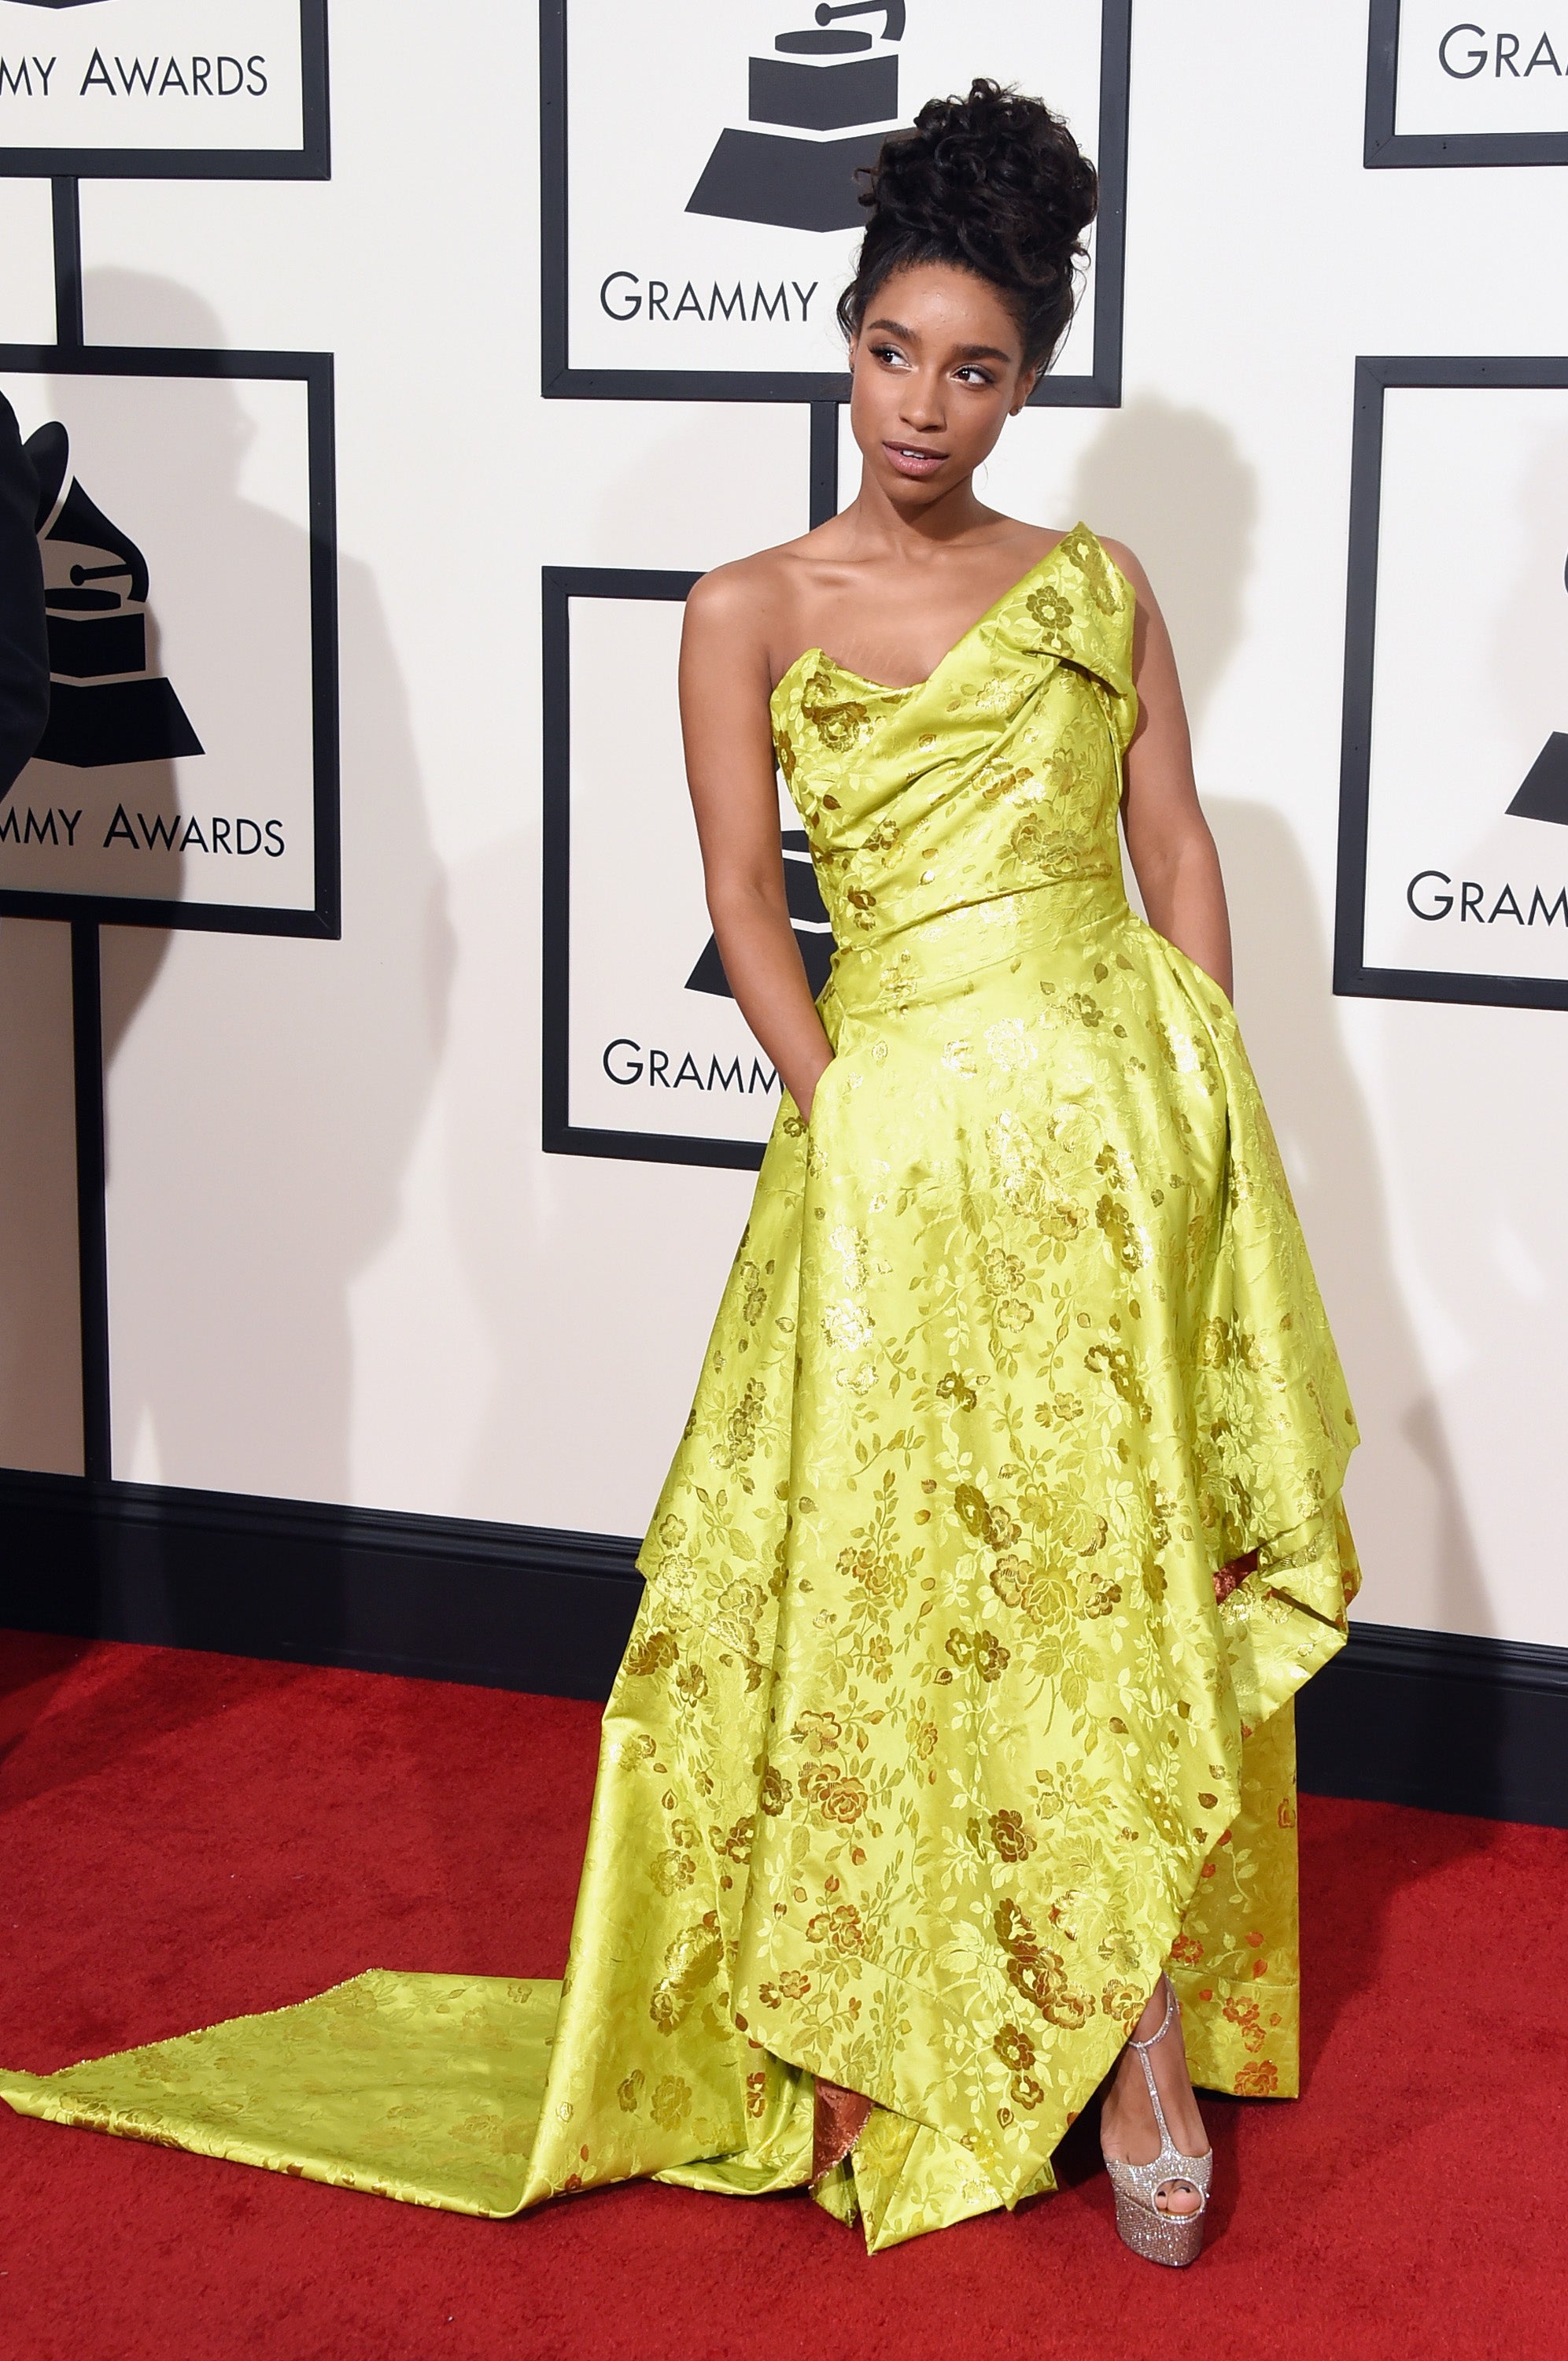 11 Show-Stopping Looks From the 2016 Grammy Awards